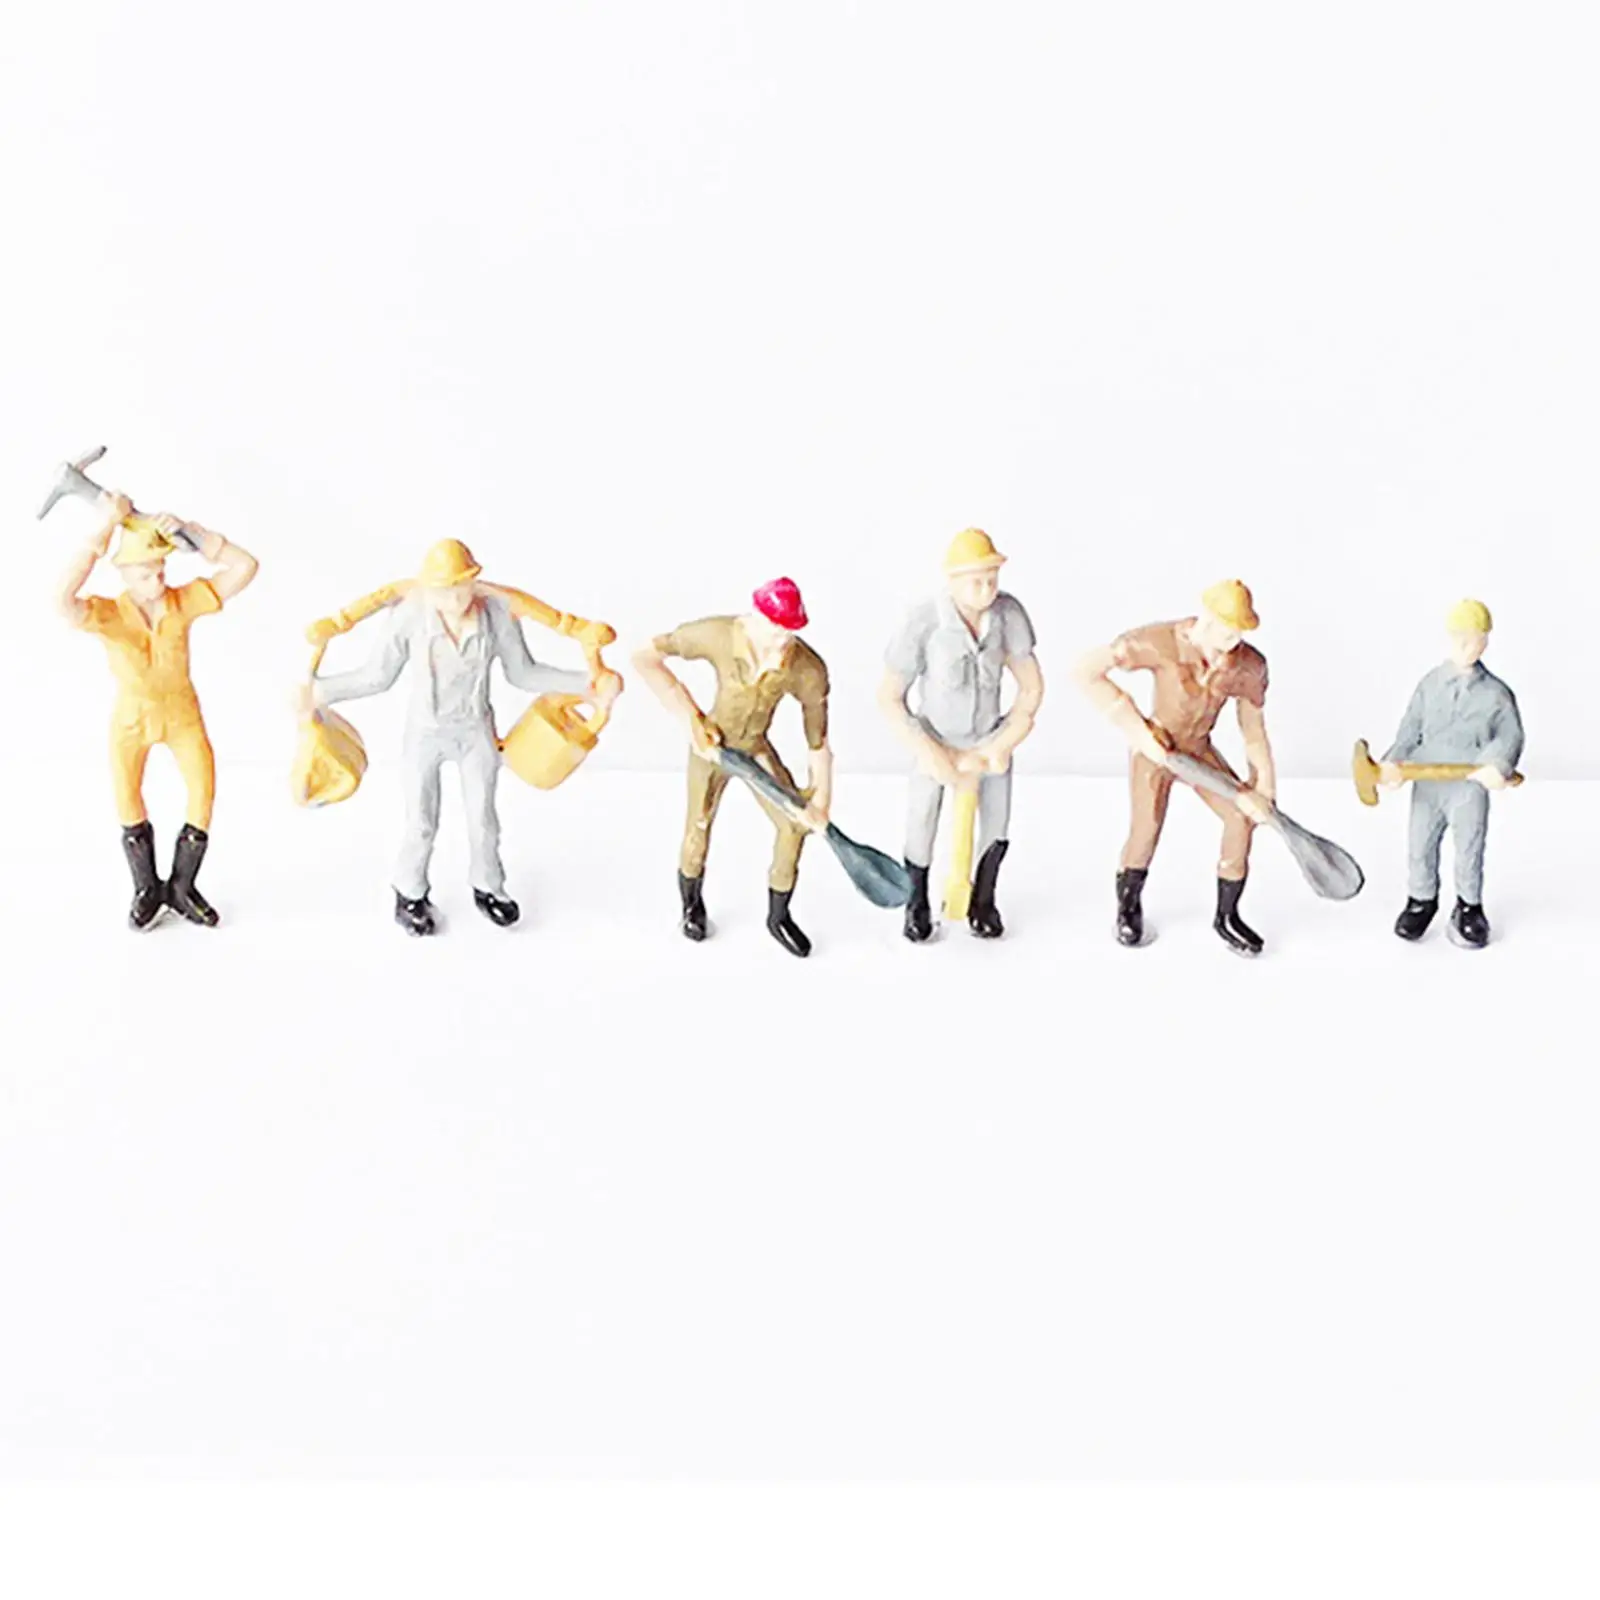 10 Pieces 1/43 Miniature Model Railroad Worker Figures Road Layout Toys Micro Landscape Miniature Tiny People DIY Projects Decor